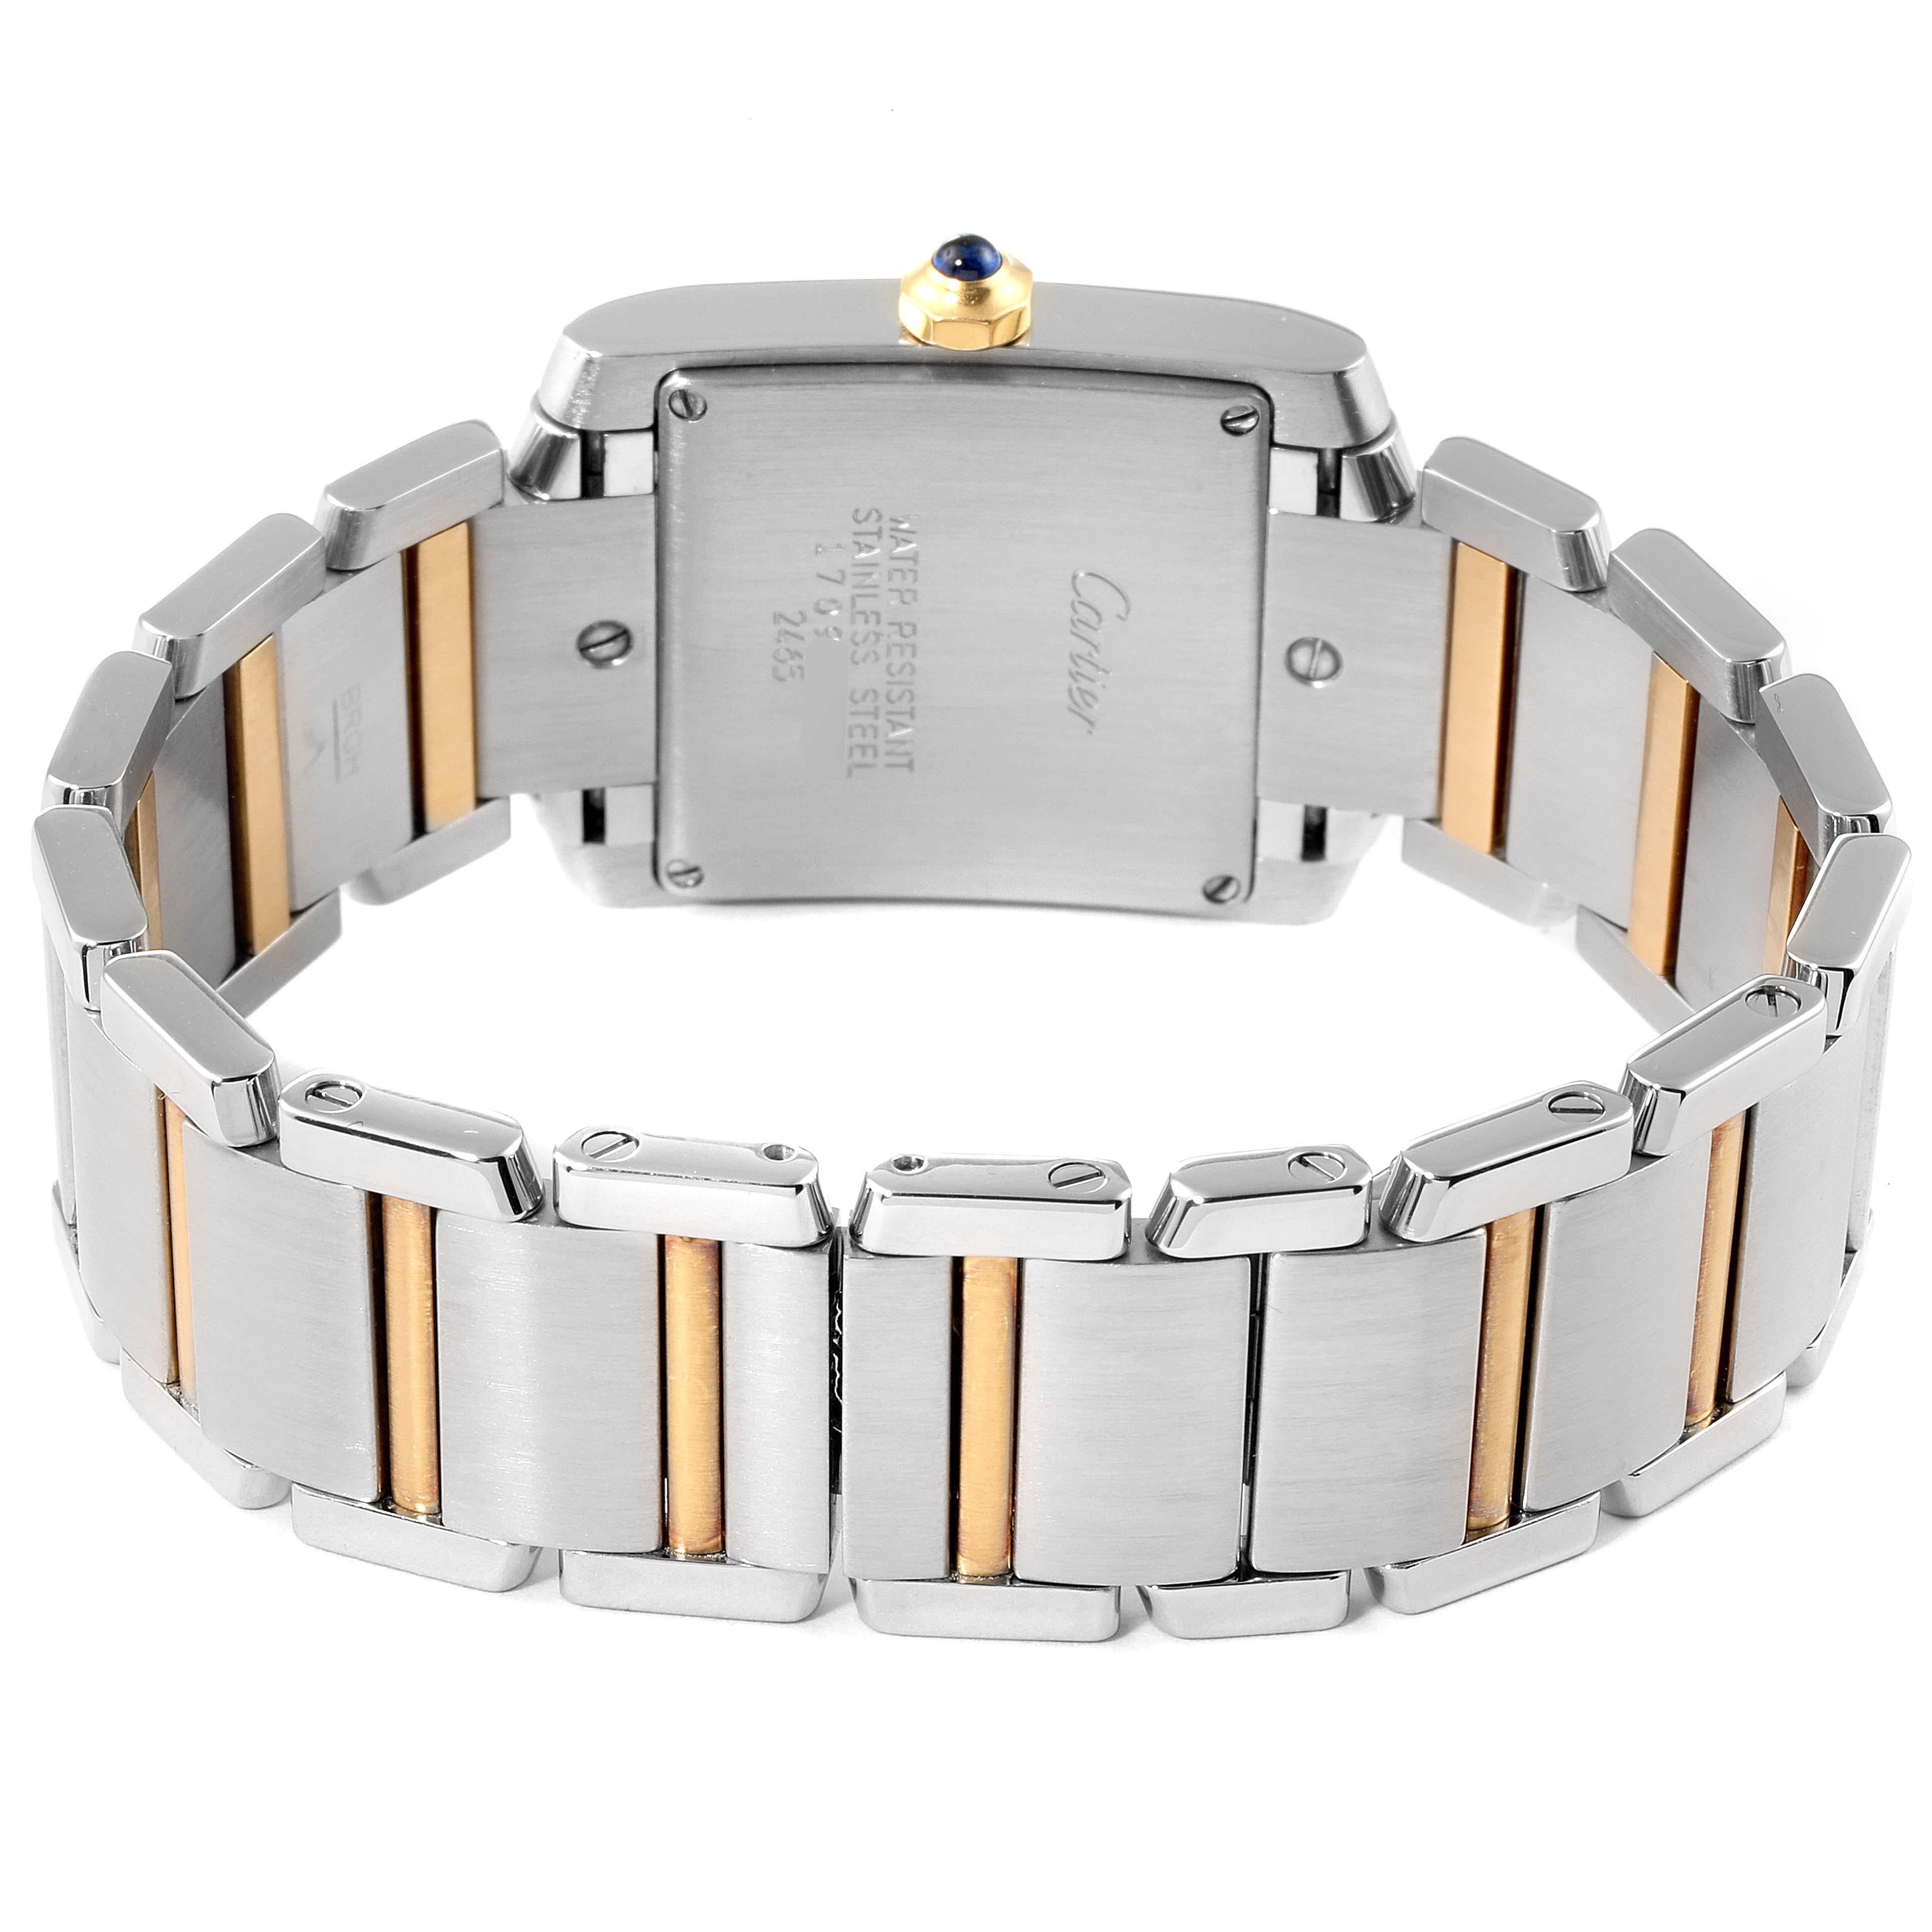 Cartier Tank Francaise Midsize Steel Yellow Gold Ladies Watch W51012Q4 For Sale 1